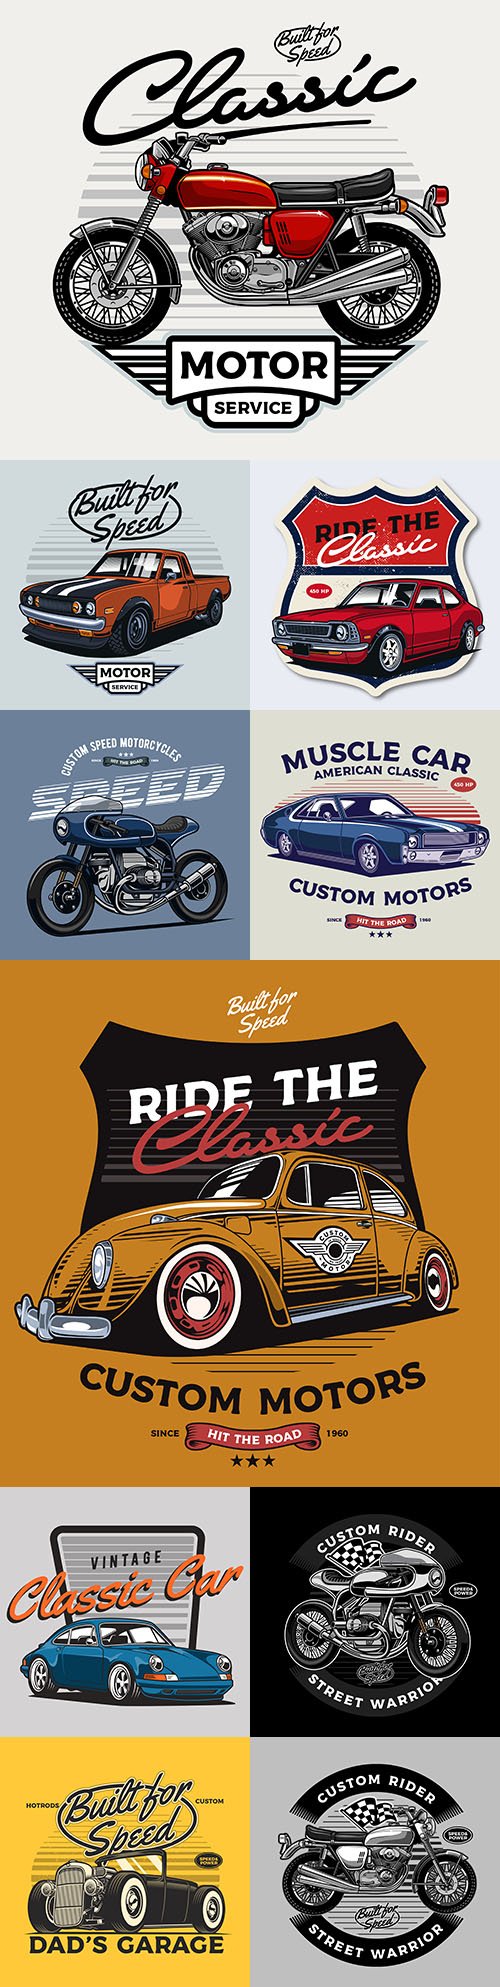 Classic car and vintage motorcycle illustrations